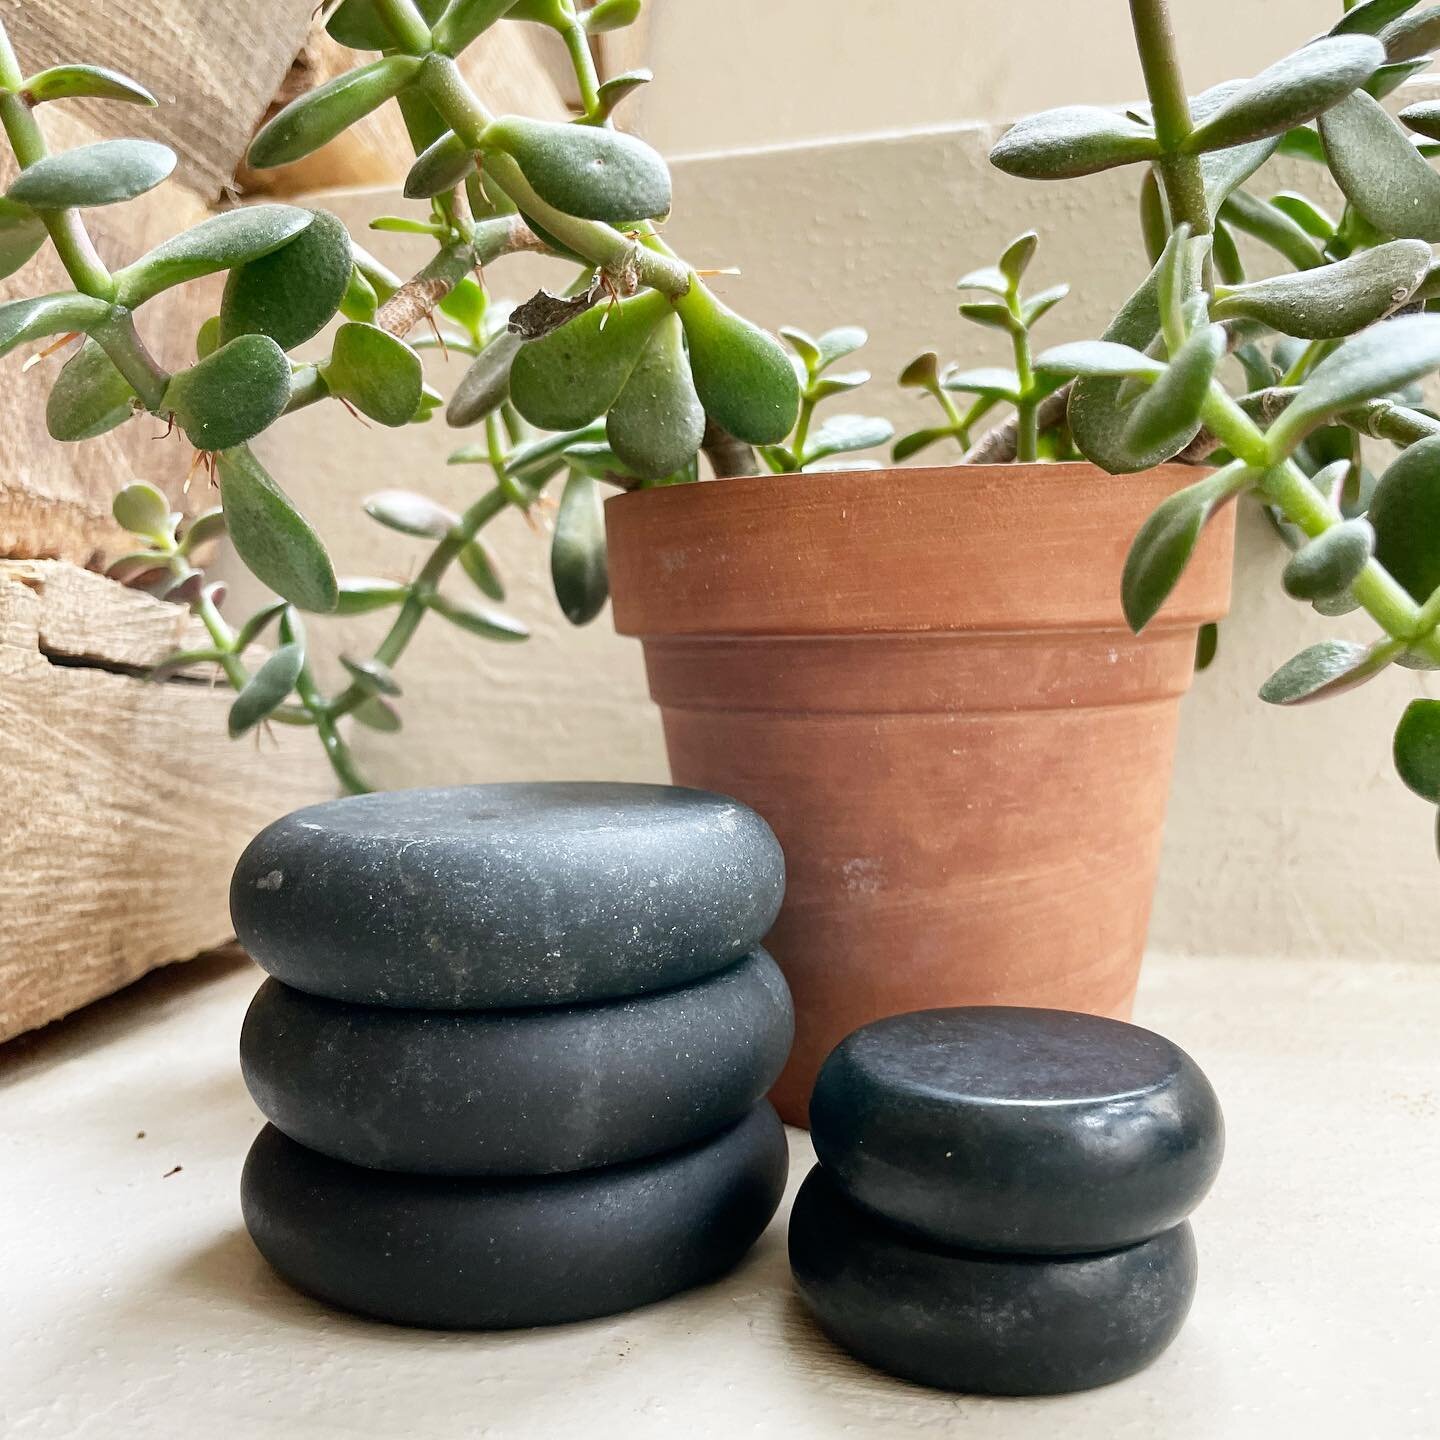 NOW OFFERING 🔥 HOT STONE THERAPY!!

Complimentary hot stones can be added to any massage at no additional charge. 

Benefits include:
-Enhanced relaxation
-Reduced muscle tension
-Increased blood flow
-Decreased pain

Stones are heated to a temperat